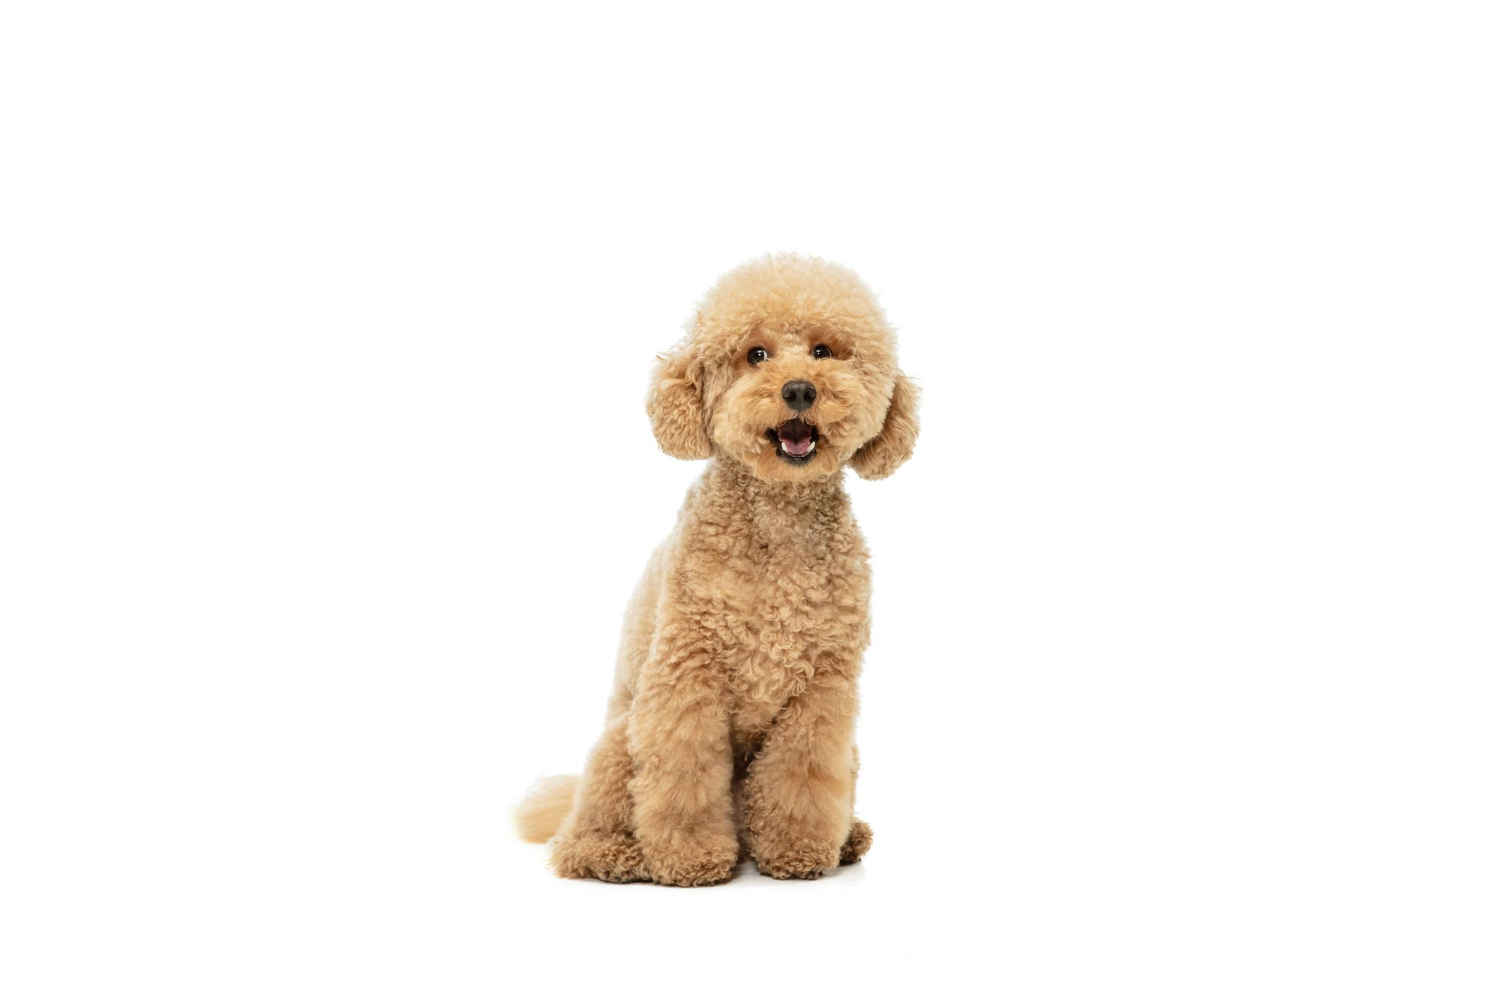 Are Poodles prone to epilepsy or other neurological disorders? How can these conditions be treated?